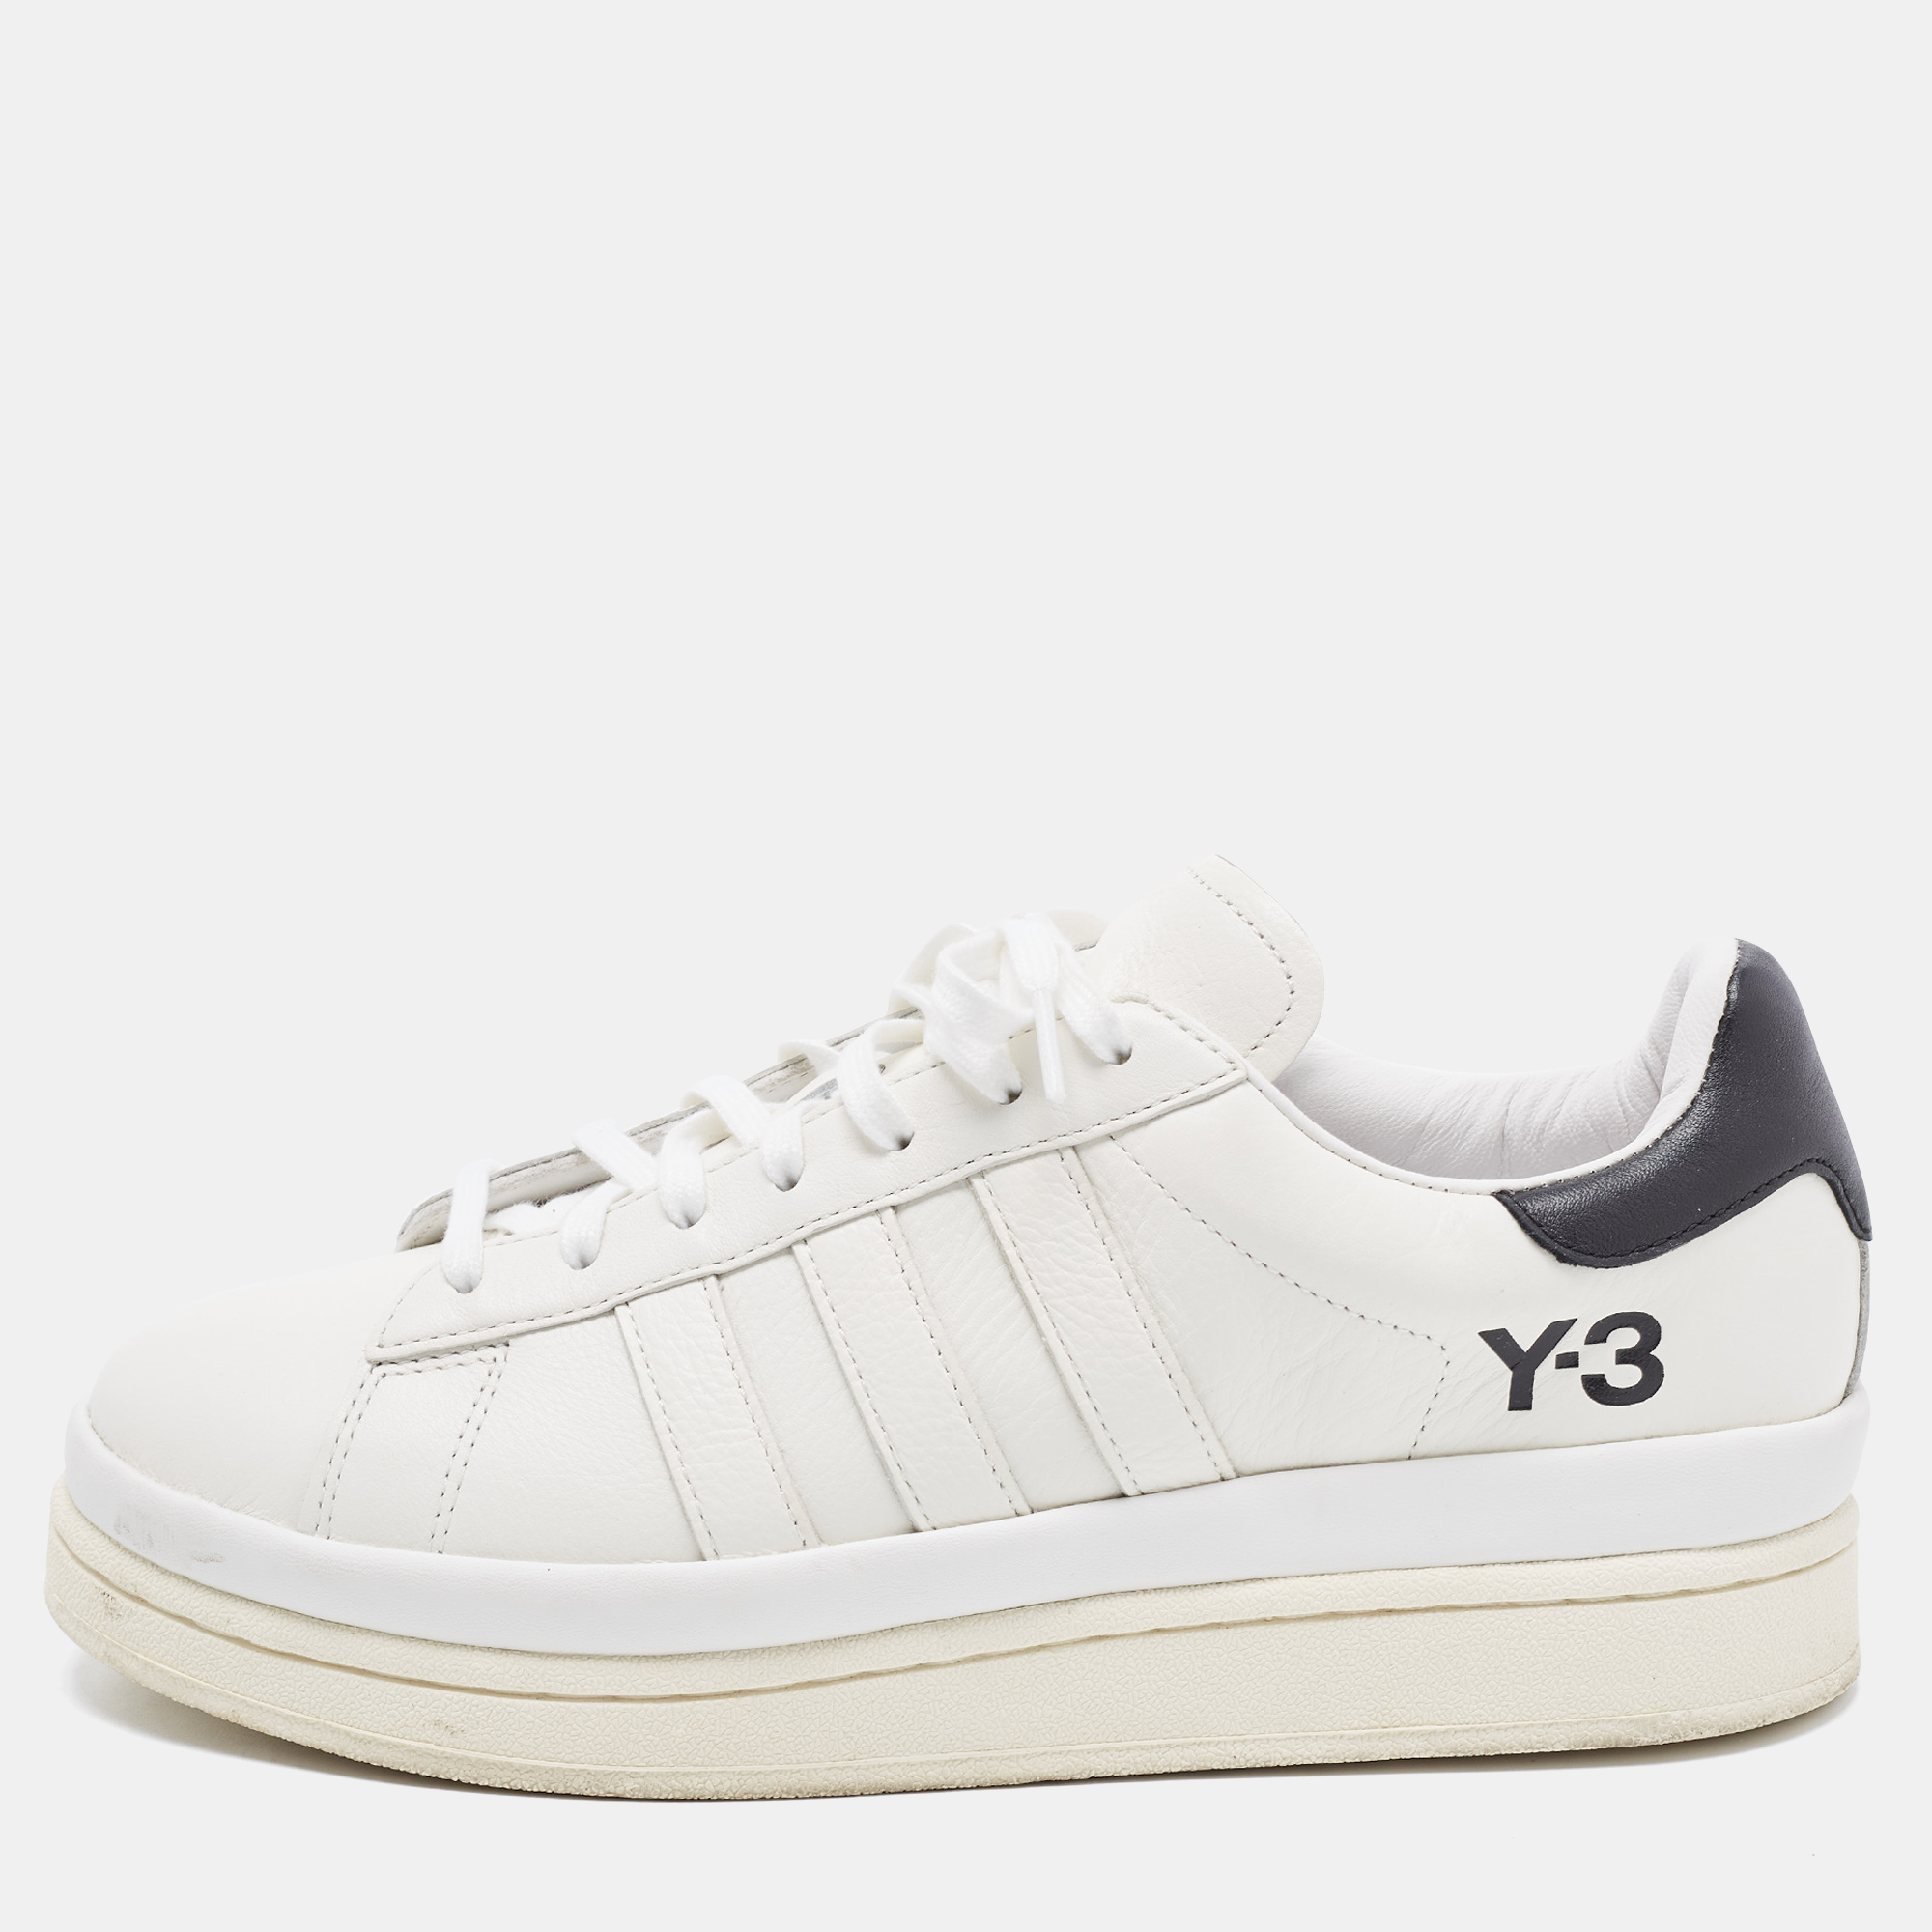 Pre-owned Y-3 White/black Leather Yohji Star Low-top Trainers Size 42 2/3